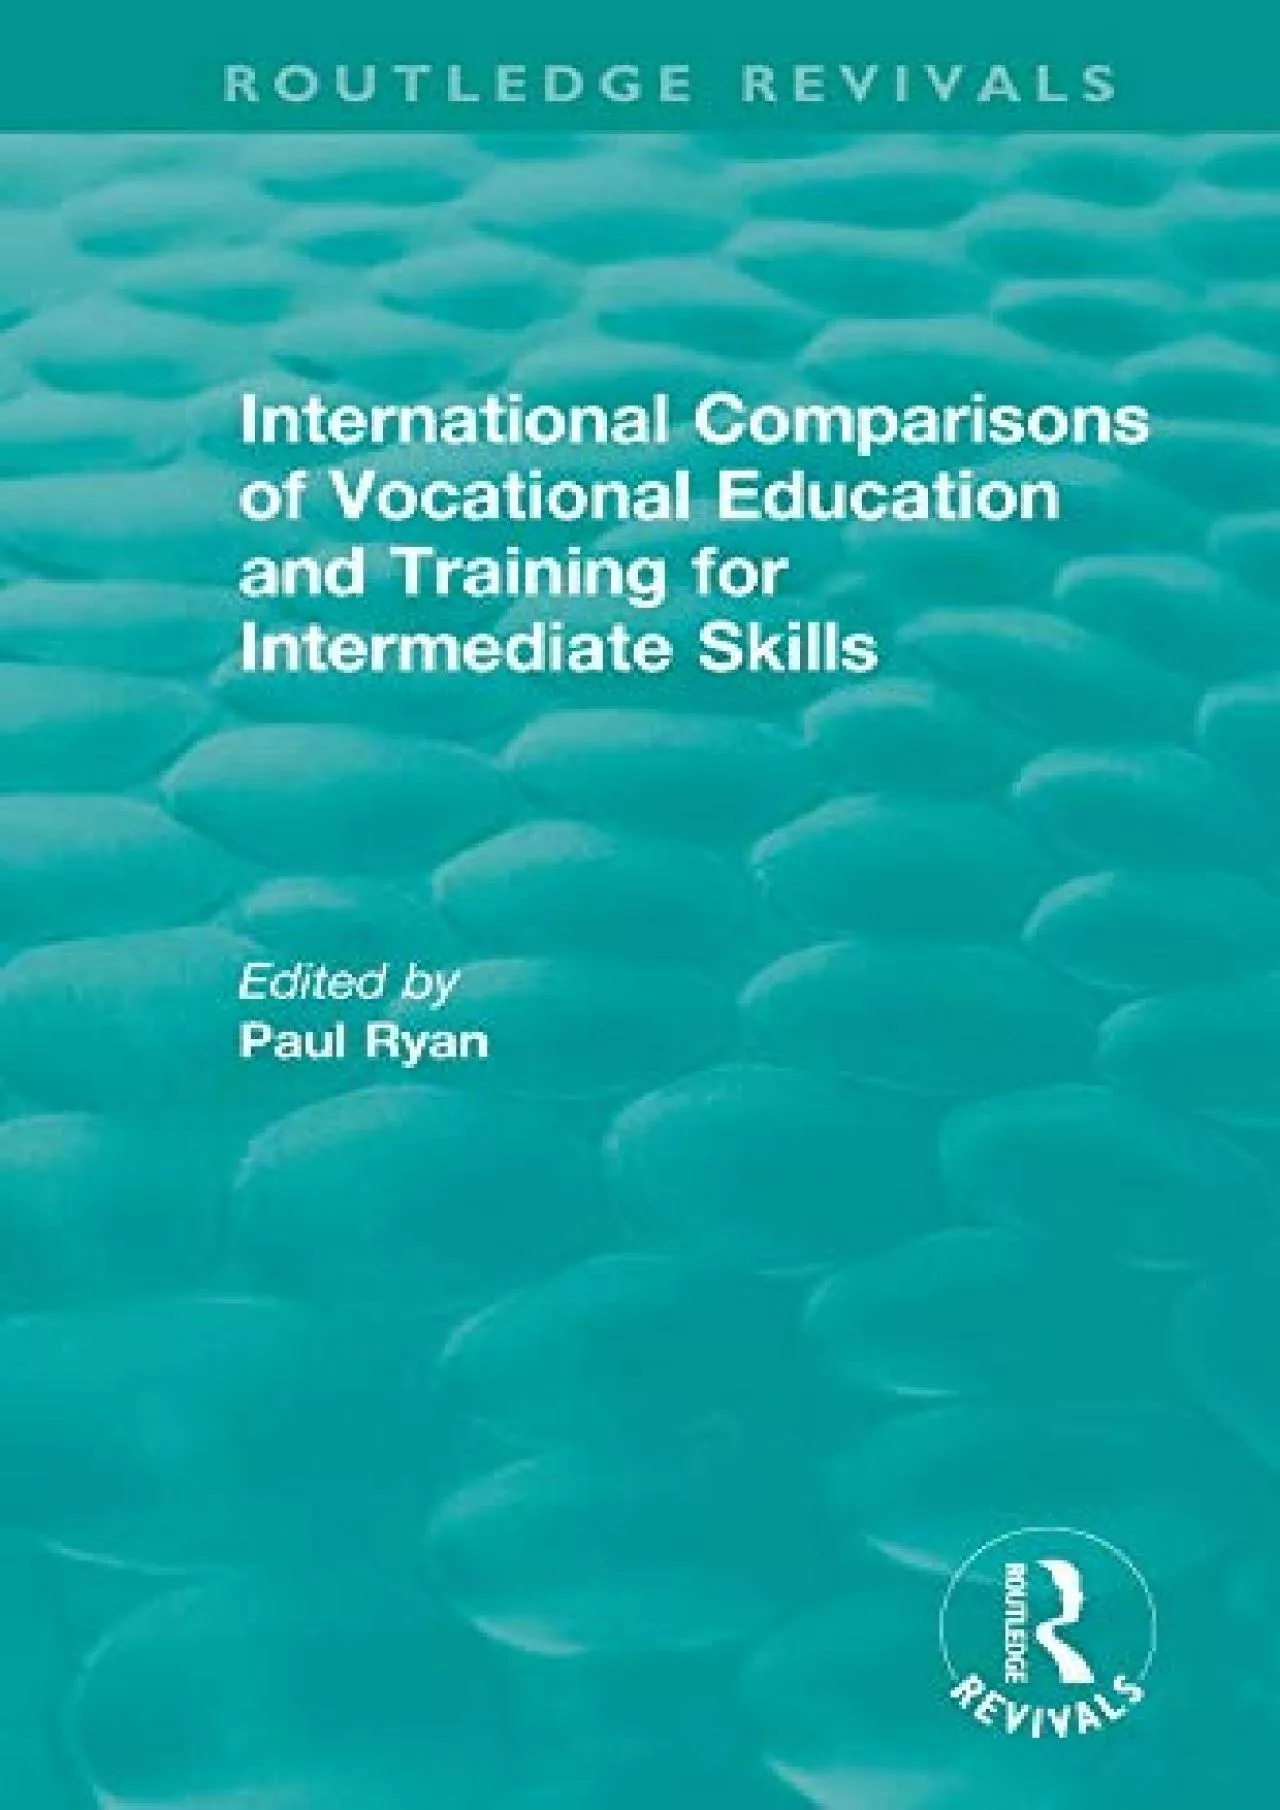 [EBOOK] International Comparisons of Vocational Education and Training for Intermediate